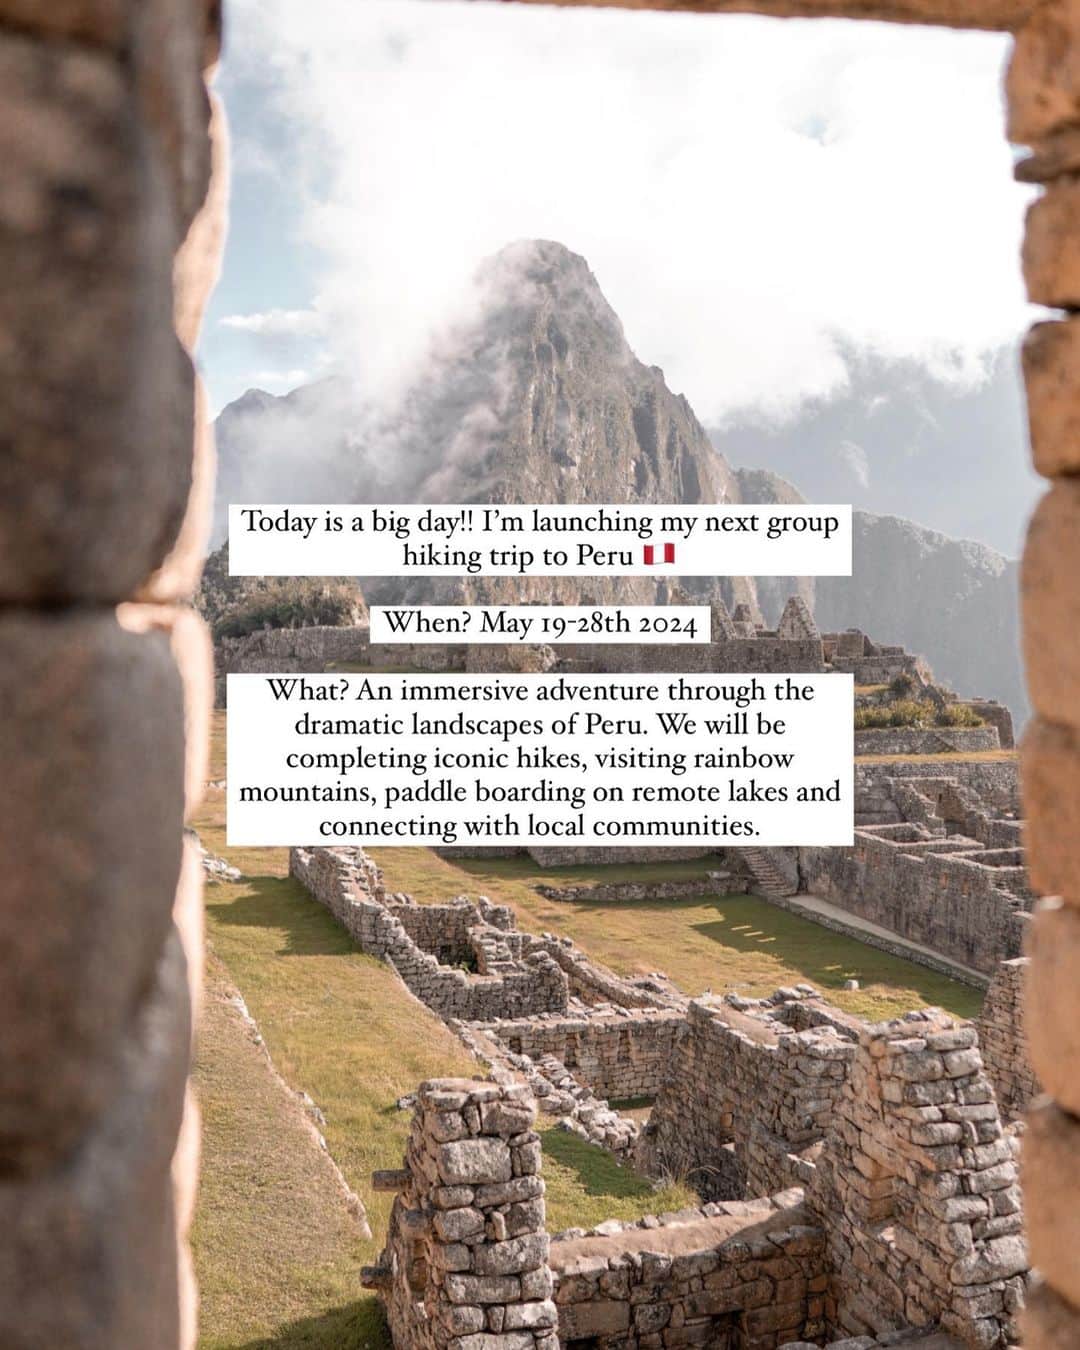 Zanna Van Dijkさんのインスタグラム写真 - (Zanna Van DijkInstagram)「COME HIKE PERU WITH ME 🇵🇪  EDIT: SOLD OUT! In 8 minutes. Fastest sell out tour ever guys. Please email if you wanna be added to the waitlist. Thank you, thank you, thank you! Plenty more adventures to come! 🙏🏼  Spaces are now available for my next 2024 group hiking trip! Here’s all the deets:  ➡️ When? May 19-28th 2024  ➡️ What? An immersive once in a lifetime adventure through the dramatic landscapes of Peru. We will be completing the iconic Inca Trail, visiting multicoloured "rainbow mountains", paddle boarding on remote mirror lakes and connecting with small local communities.   ➡️ What will we see? Highlights include: ✨ Trek the iconic Inca Trail over four days, ending with a sunrise hike to Machu Picchu, the breathtaking lost city. ✨ Visit the beautiful Palcoyo community which is home to the famous multicolour "rainbow mountains".  ✨ Immerse yourself in the bustling cities of Lima and Cusco through private walking tours. ✨ Paddle board on a peaceful mirror lake off the beaten tourist track, right in the heart of the Andes. ✨ Explore the sacred valley, Wilcamayo, and connect with the local Ocotuan community who live there. ✨ Tour the Inca town of Ollantaytambo and experience its photogenic terraces. ✨ And so much more! This is a real bucket list trip!  ➡️ Price & booking? £2300 for 10 days. This includes all activities, internal flights, accomodation and many meals. It does not include international flights. Bookings can be made through my website shop, you can also find more info and the full detailed itinerary there ✅   ➡️ Anything else? Veggie and vegan options will be provided. Most guests come solo so don’t be afraid to travel alone. This is an intermediate trip. You’ll need a good base level of fitness for this adventure as on the trekking days we will be doing a significant amount of hiking. More FAQs are answered on my stories 🥾  I can’t wait to make memories with you! ♥️ (ad - my own retreat) #hikingretreat #grouphiking」9月28日 18時08分 - zannavandijk